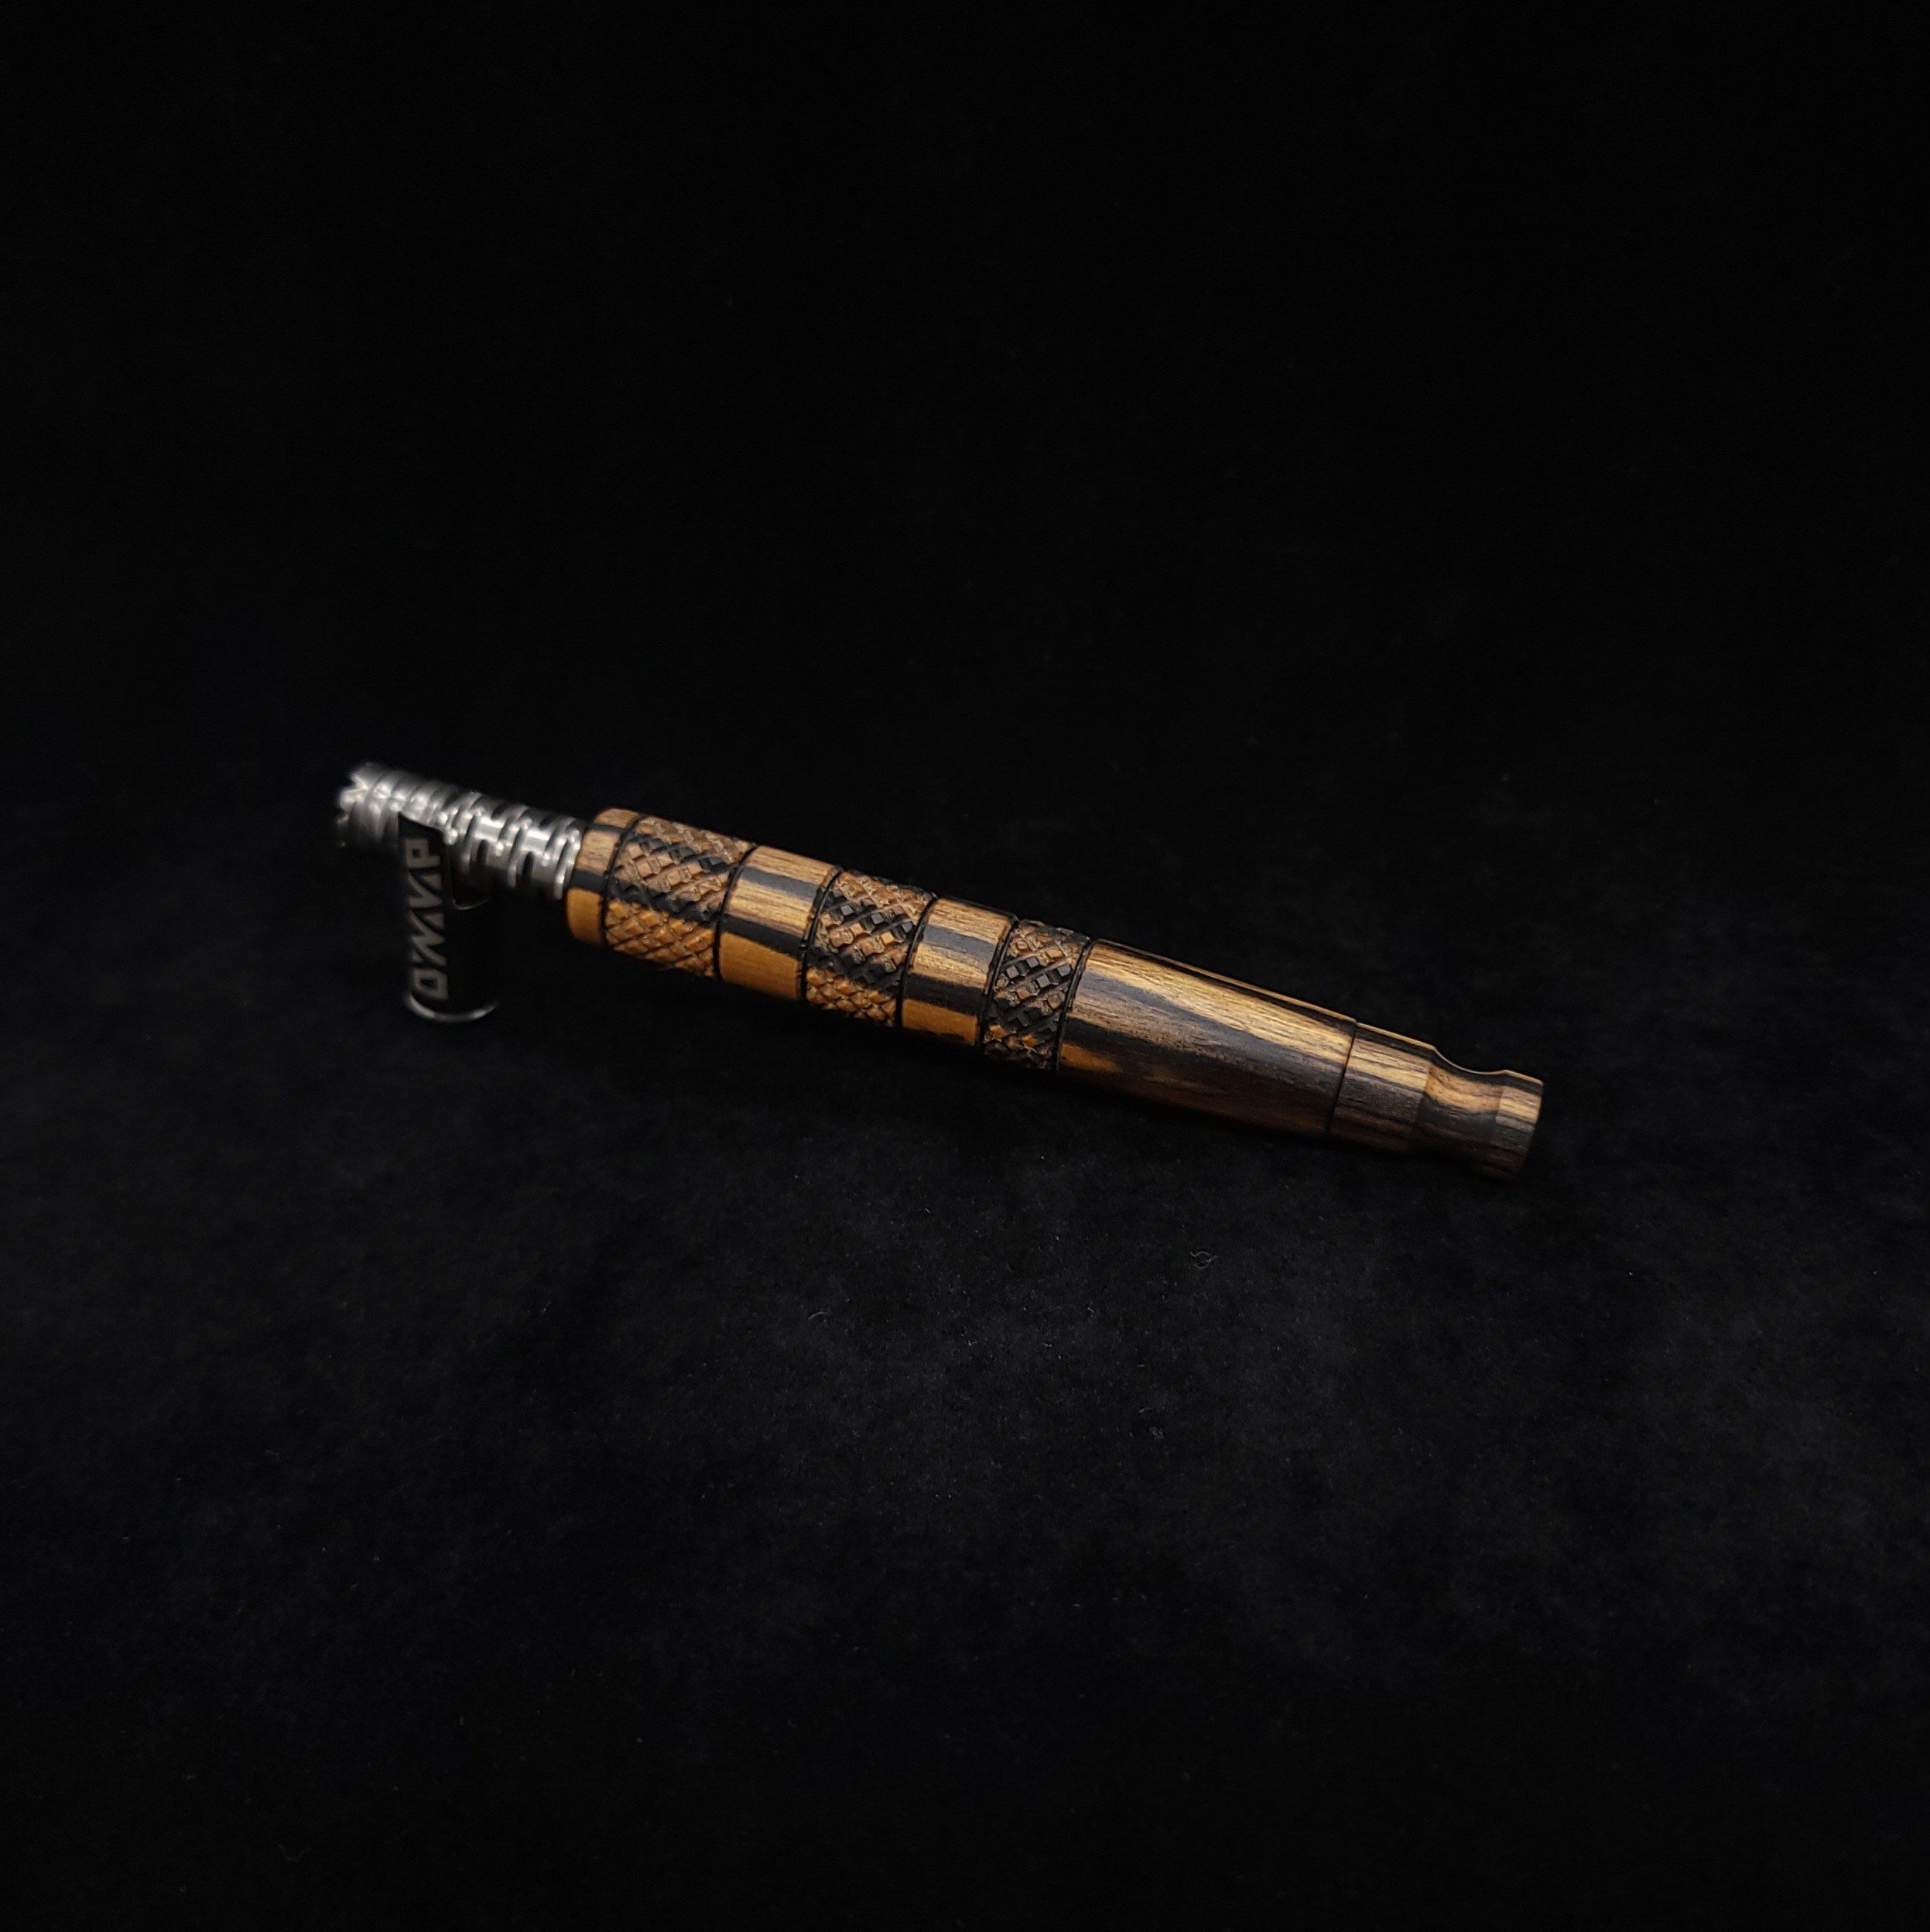 This image portrays High Class-Knurled XL Dynavap Stem/Black & White Ebony with Matching Mouthpiece by Dovetail Woodwork.